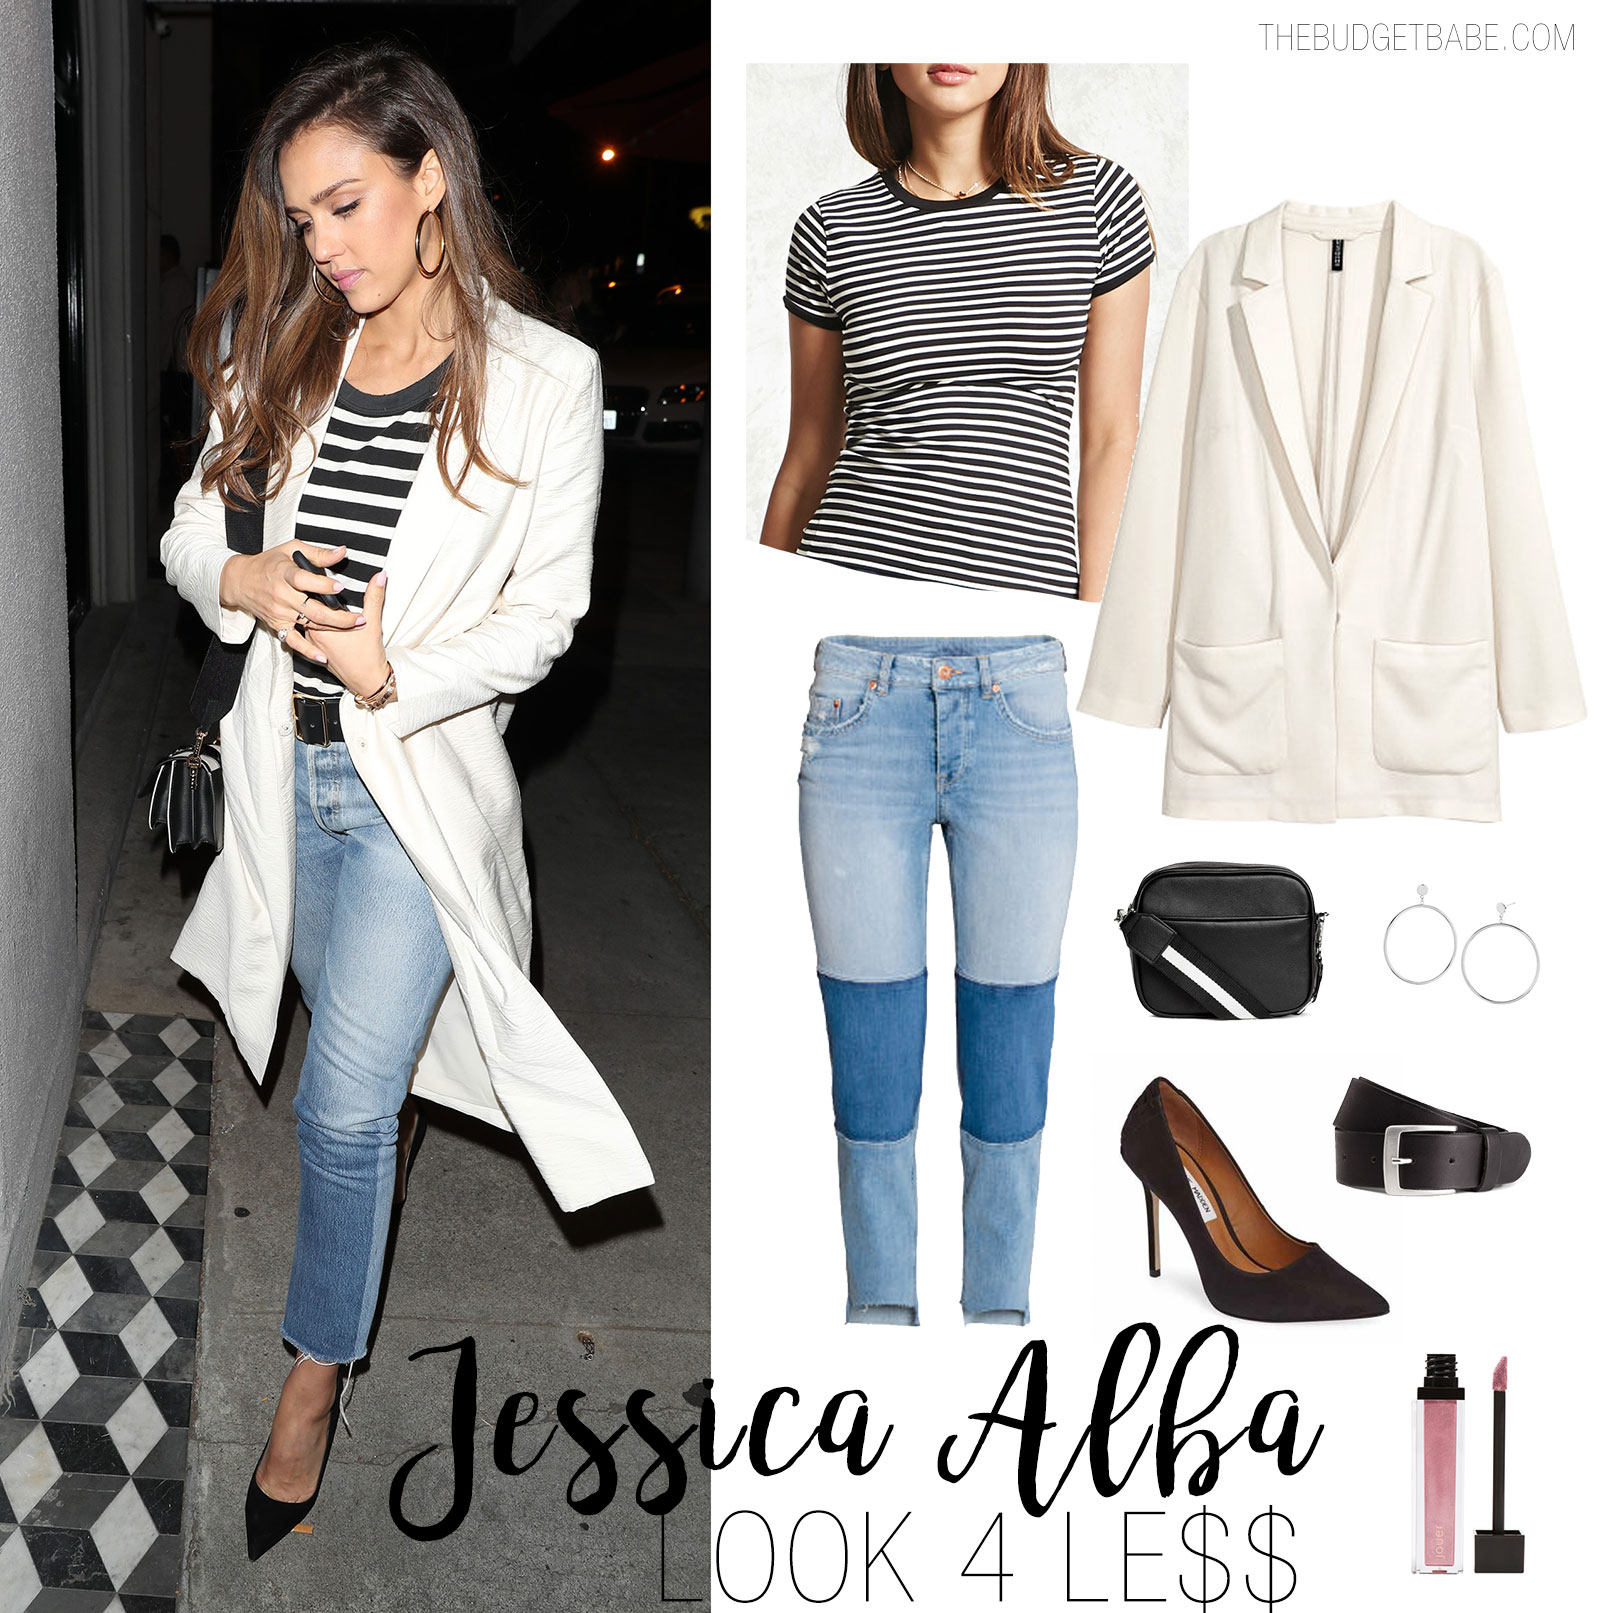 Jessica Alba striped top and white blazer look for less